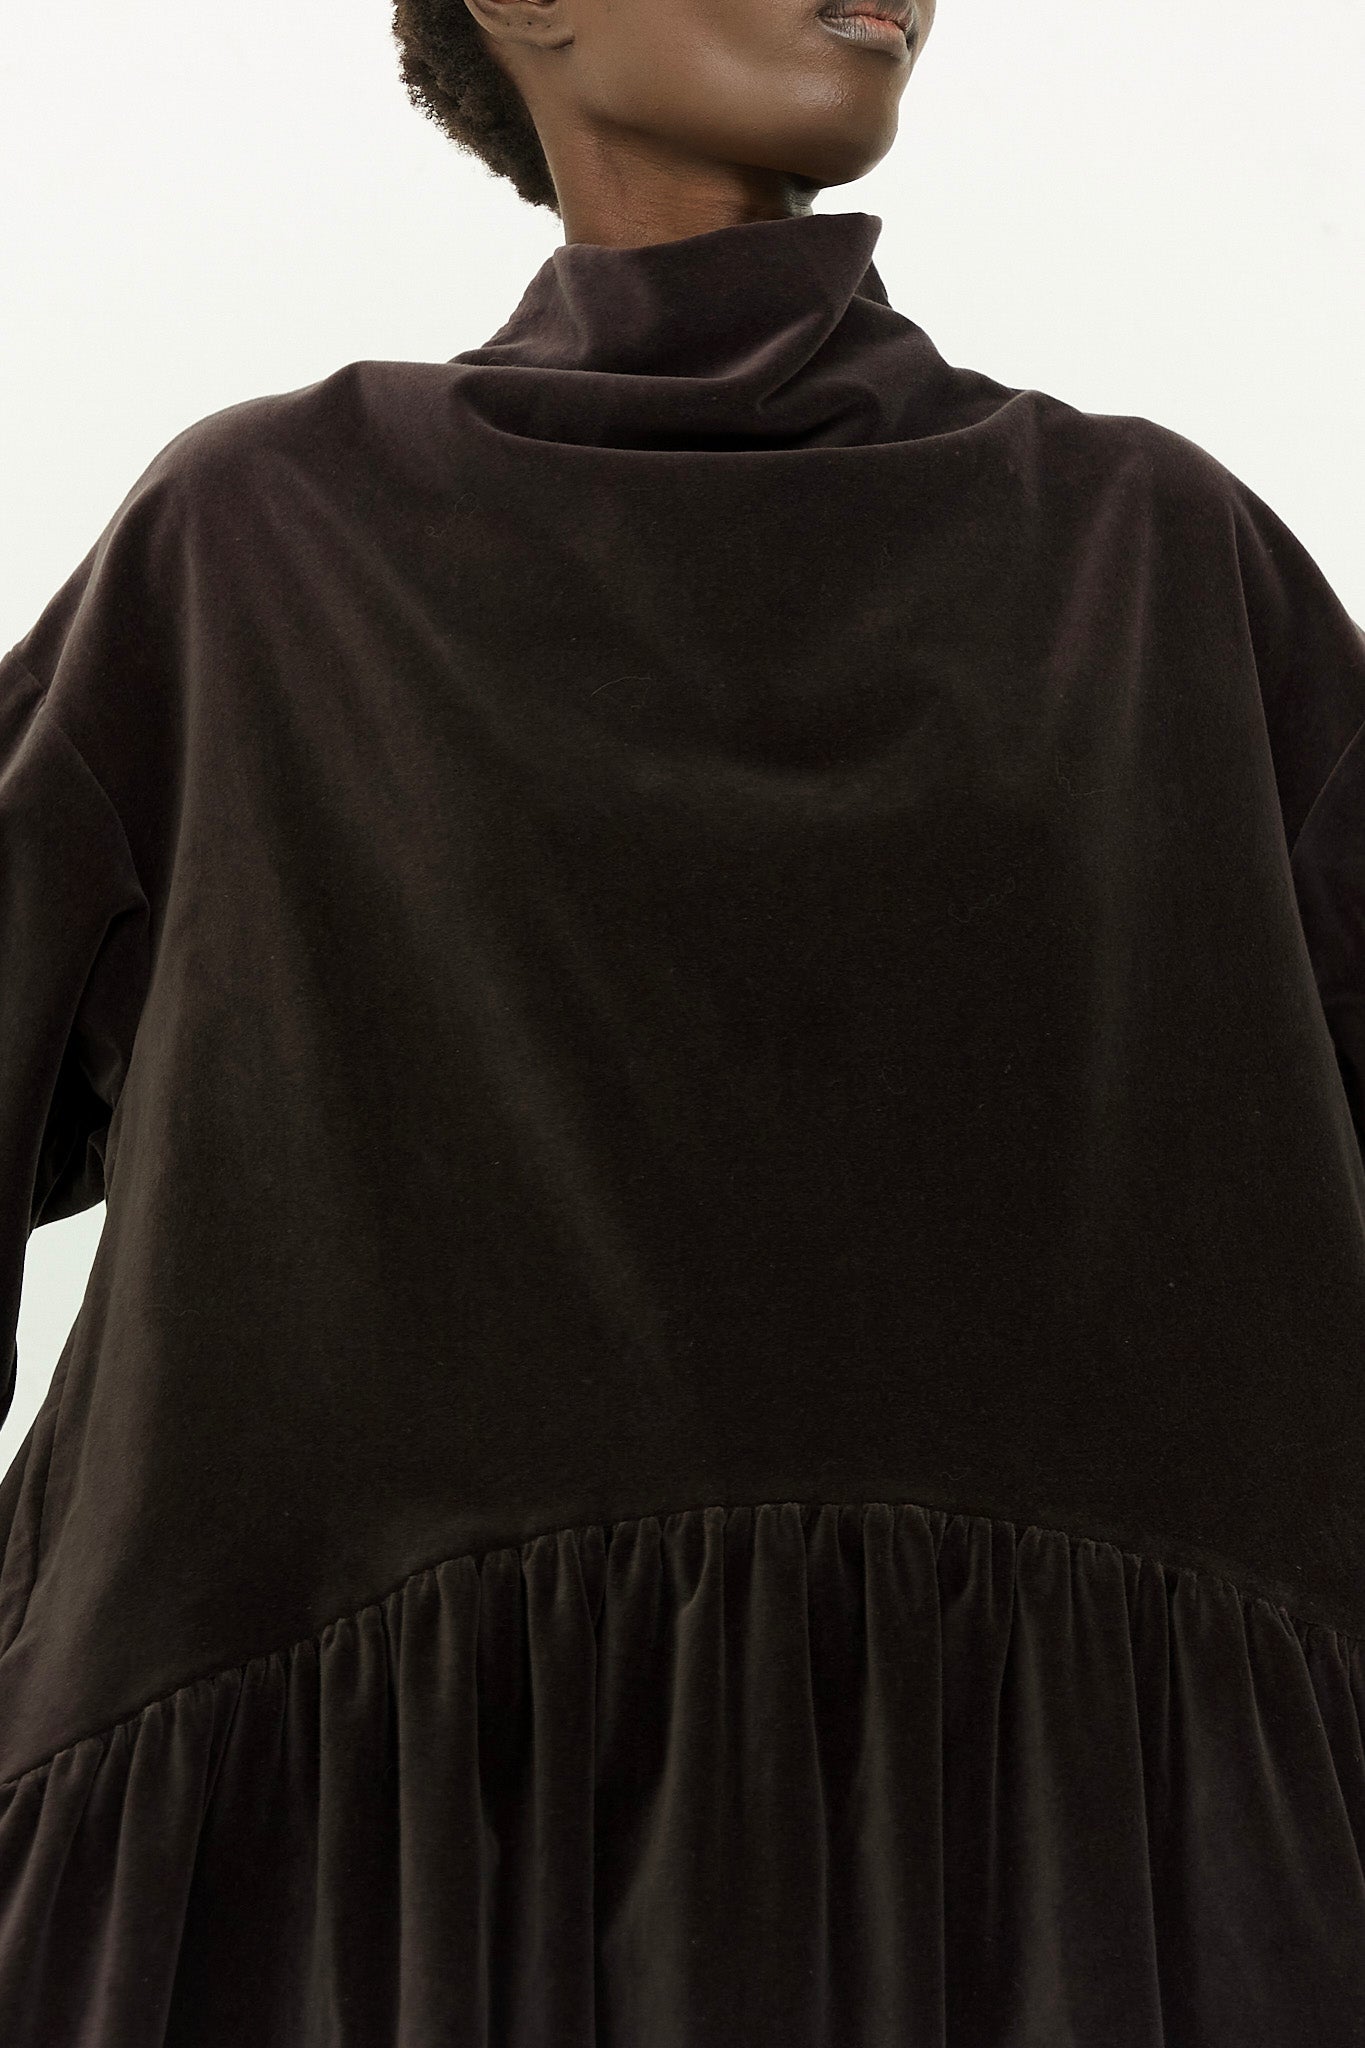 A black top with a ruffled hem.